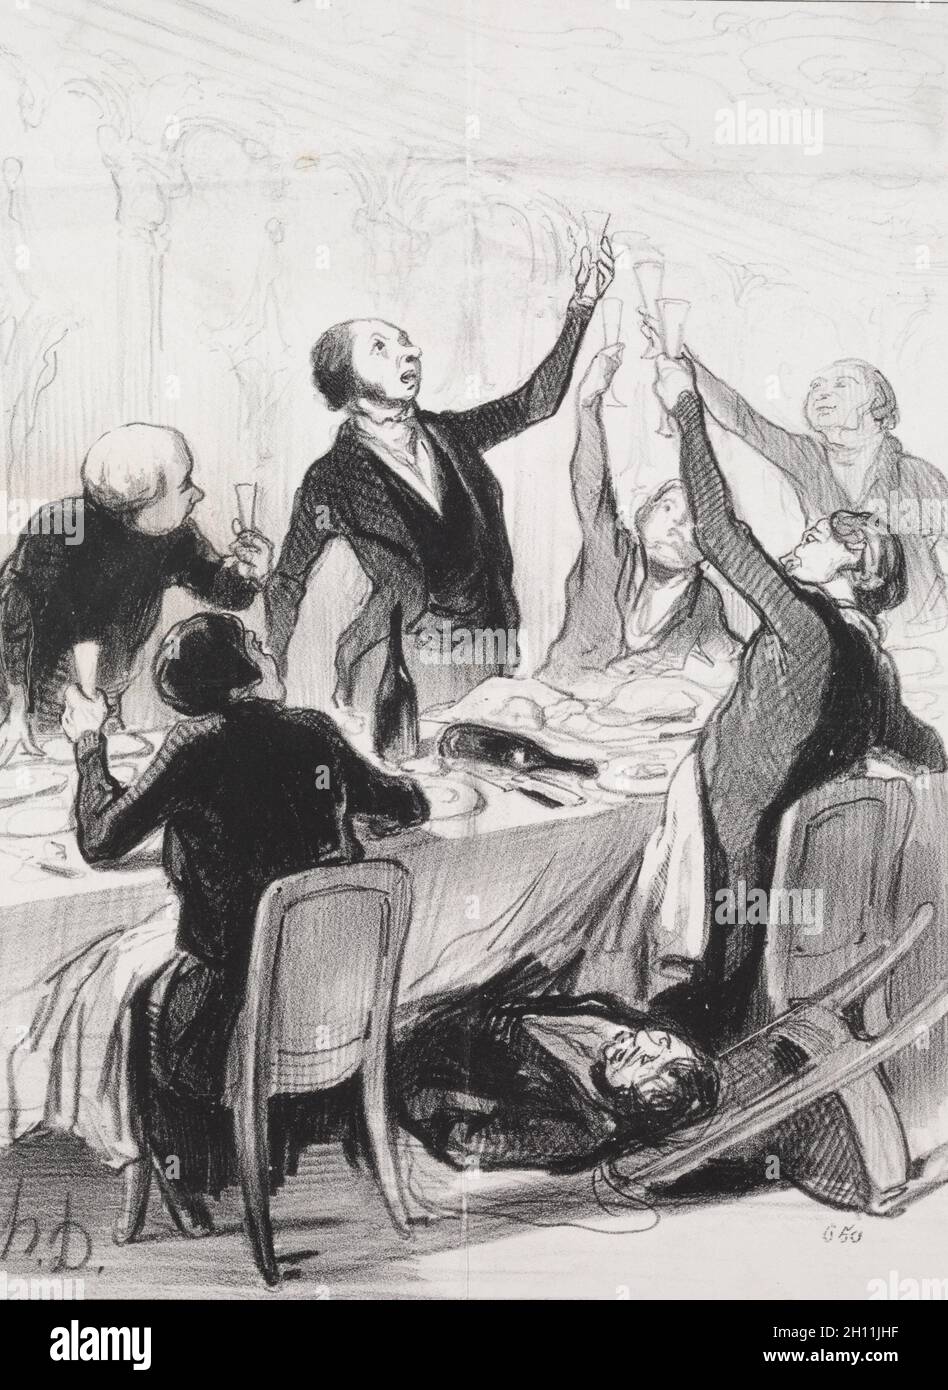 The Philanthropists of the Day: A 43rd Toast...to the Temperance Society, 1844. Honoré Daumier (French, 1808-1879). Lithograph; sheet: 35.8 x 26.9 cm (14 1/8 x 10 9/16 in.); image: 23.5 x 17.8 cm (9 1/4 x 7 in.). Stock Photo